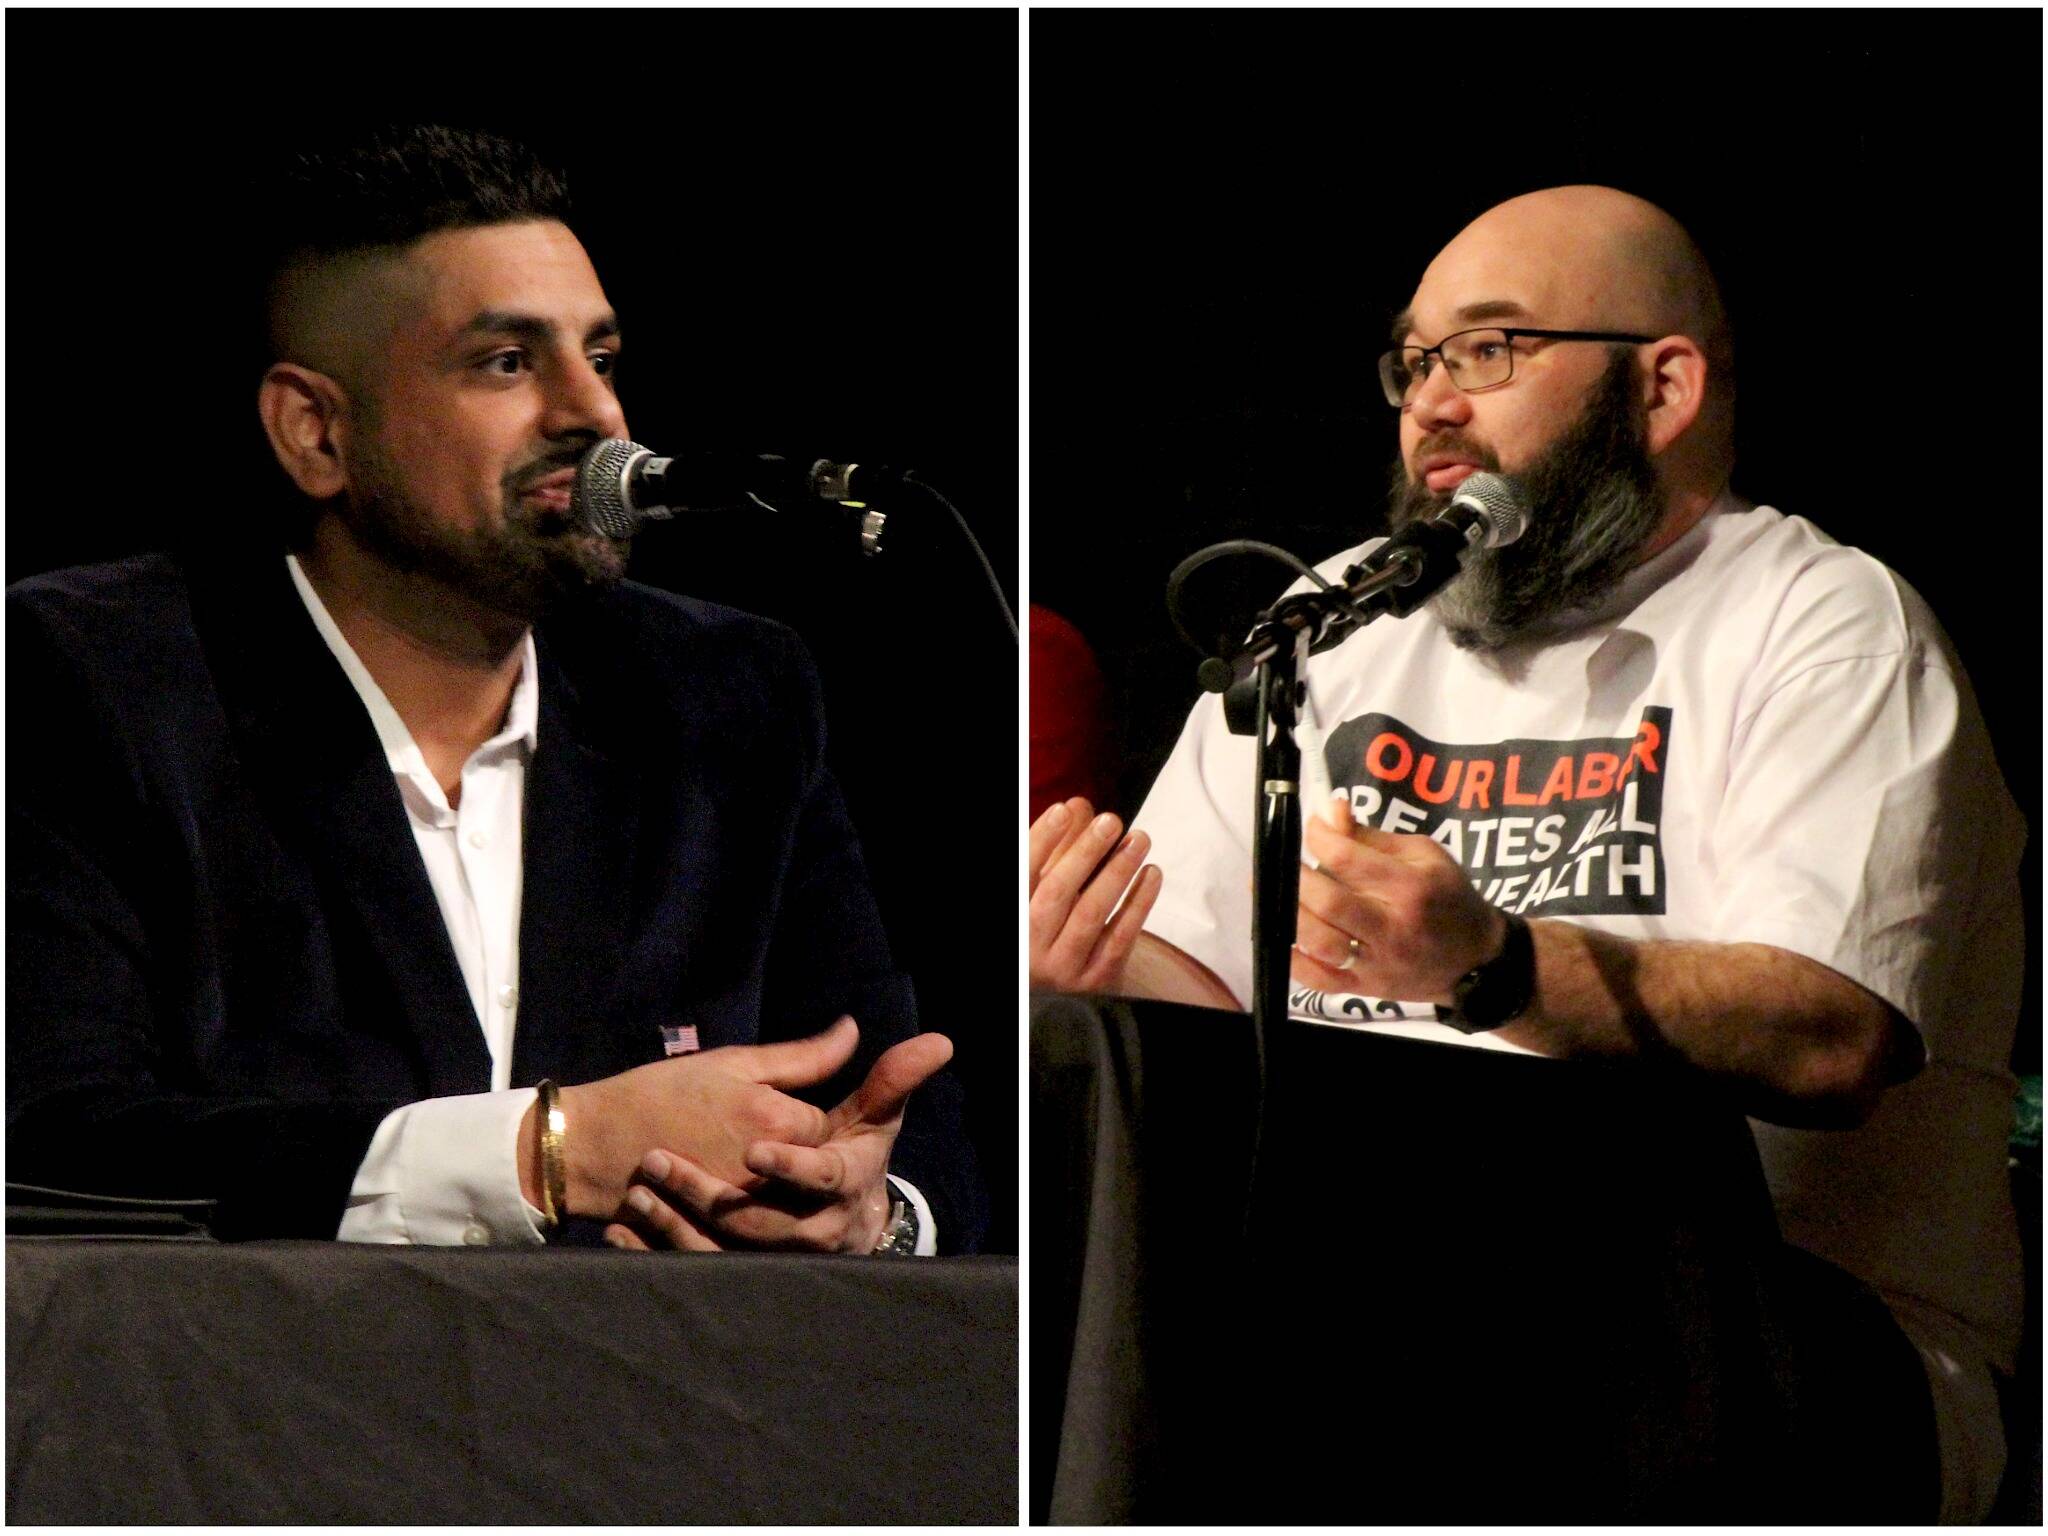 Ramandeep Mann (left) spoke against the Raise the Wage ballot initiative as Michael Westgaard (right) spoke for it during a forum Jan. 31 at Carco Theatre in Renton. (Photo by Bailey Jo Josie/Alb Media)